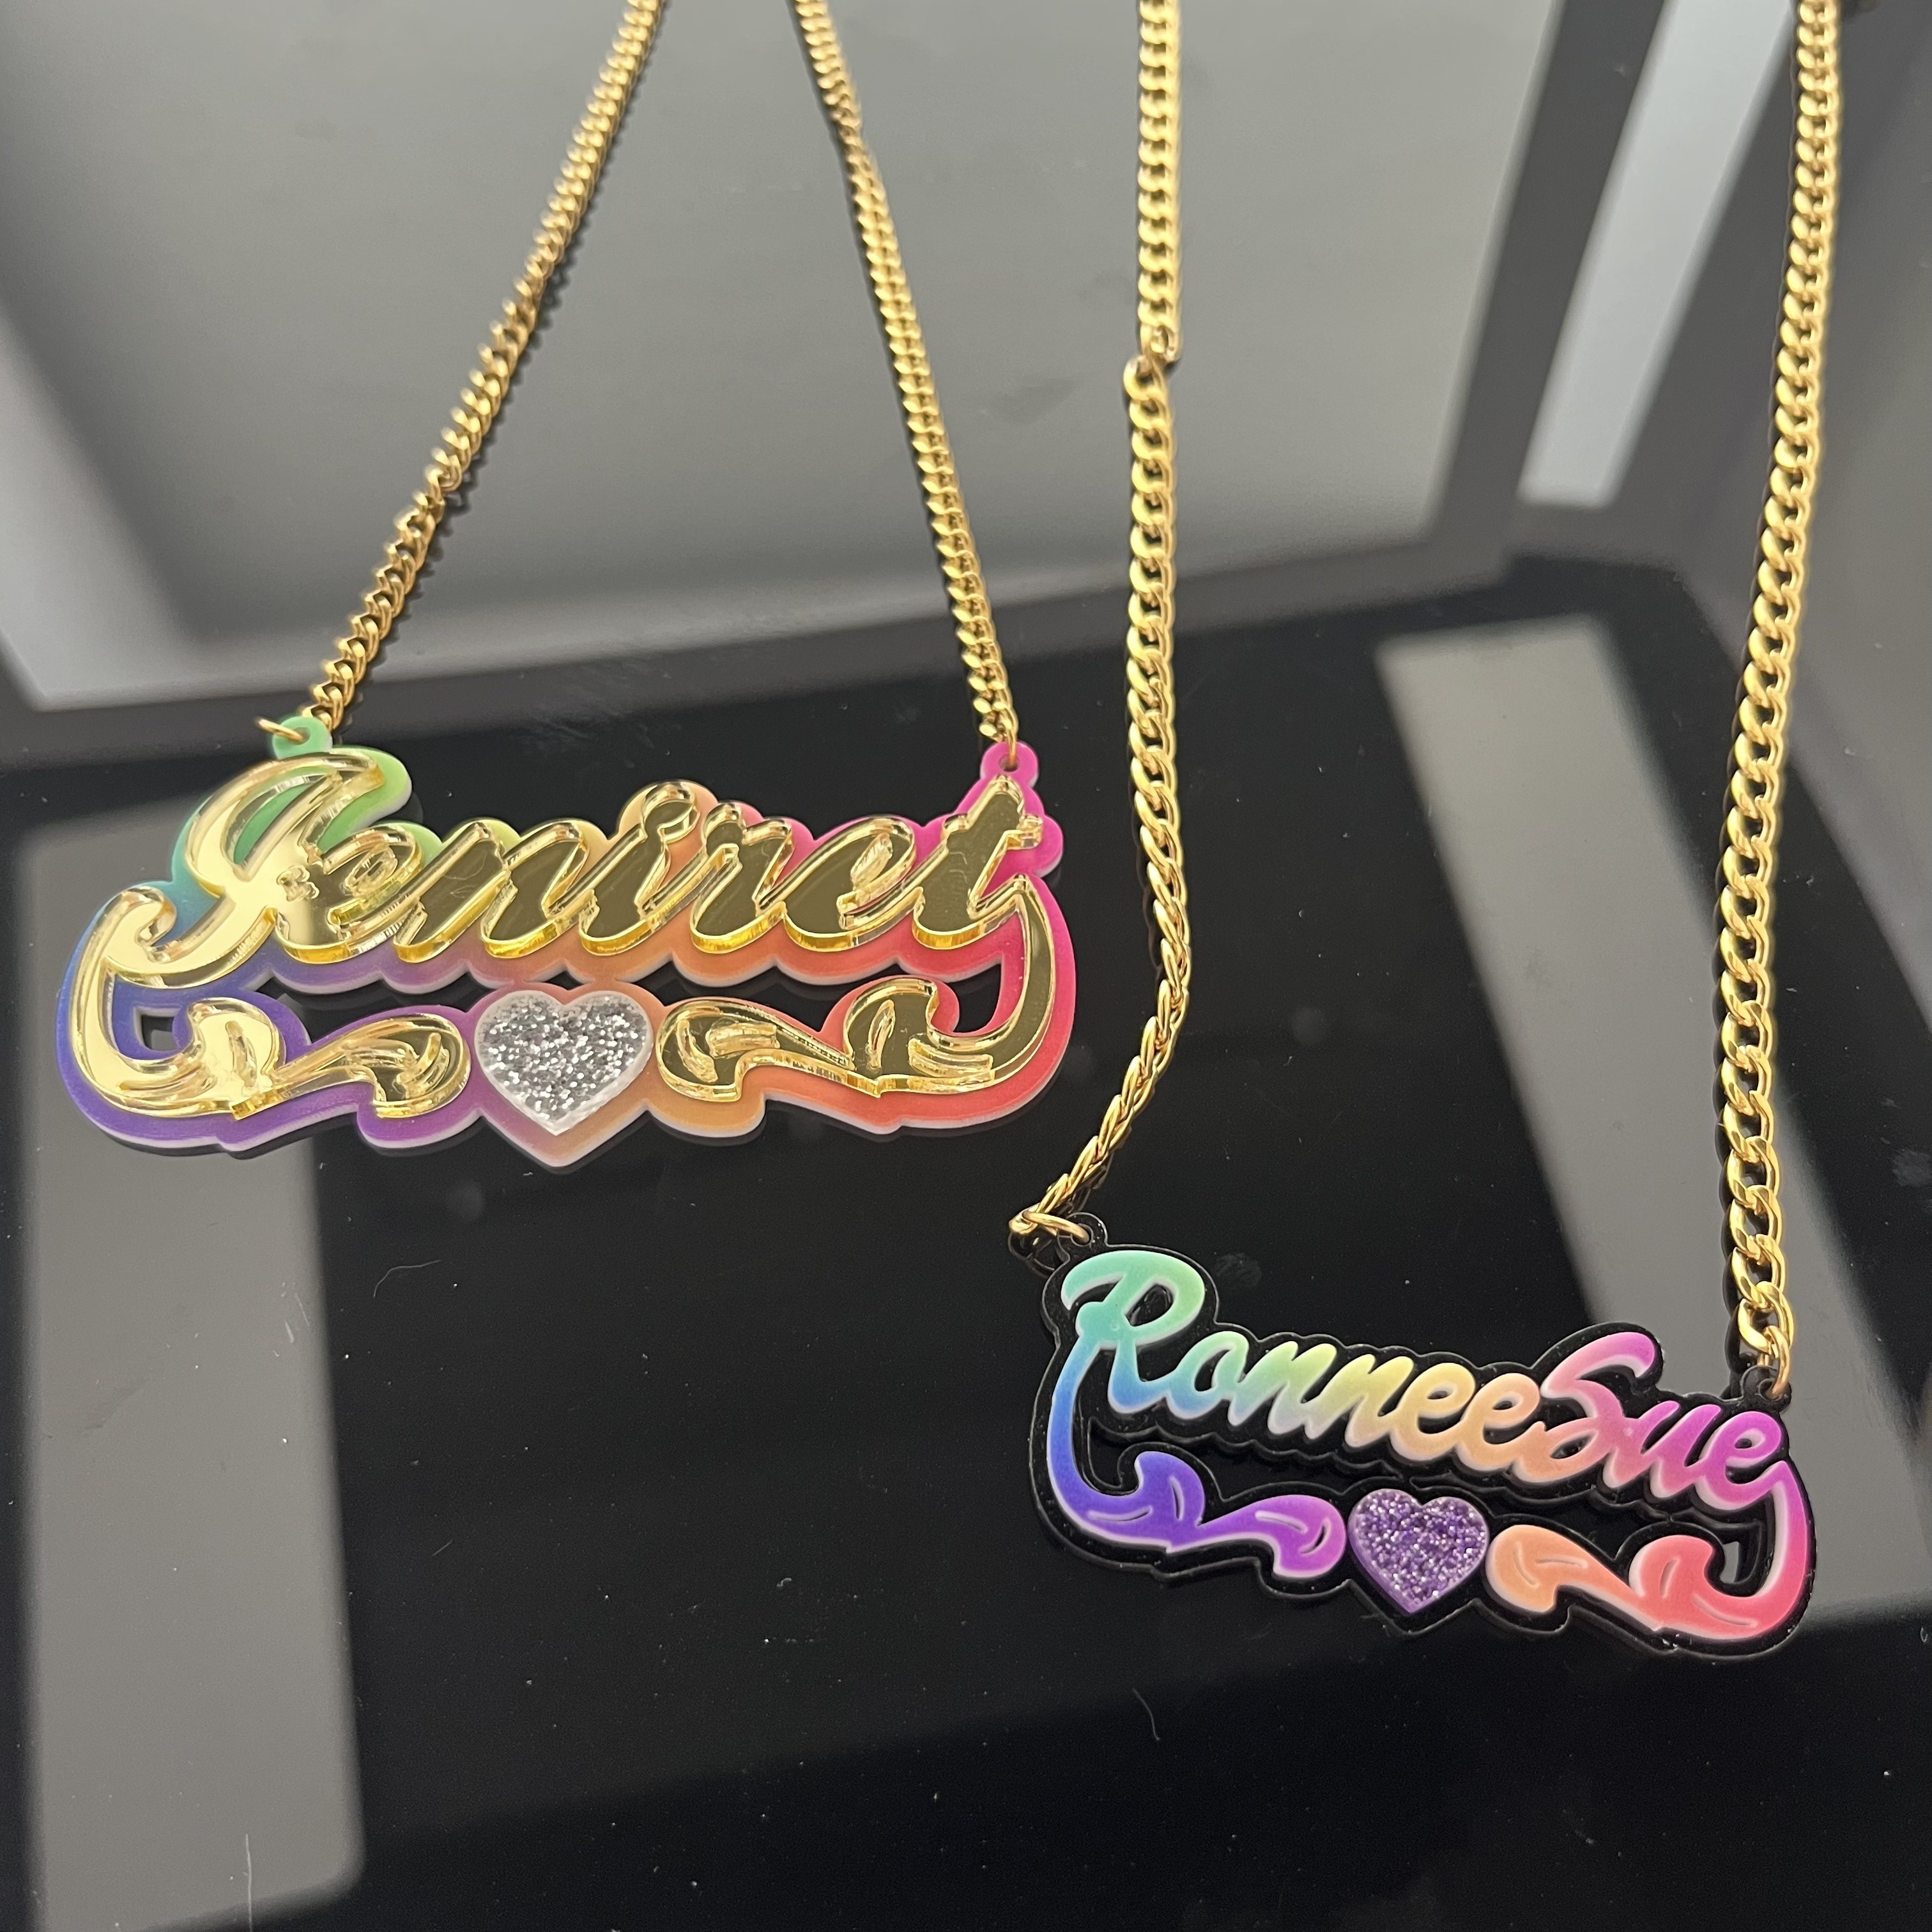 

1pc Customized Rainbow Acrylic Nameplate Necklaces With Glitter Heart Accent, Elegant & Classic Style, Multicolor Personalized Name Pendant, Customizable Name Jewelry Gifts For Women